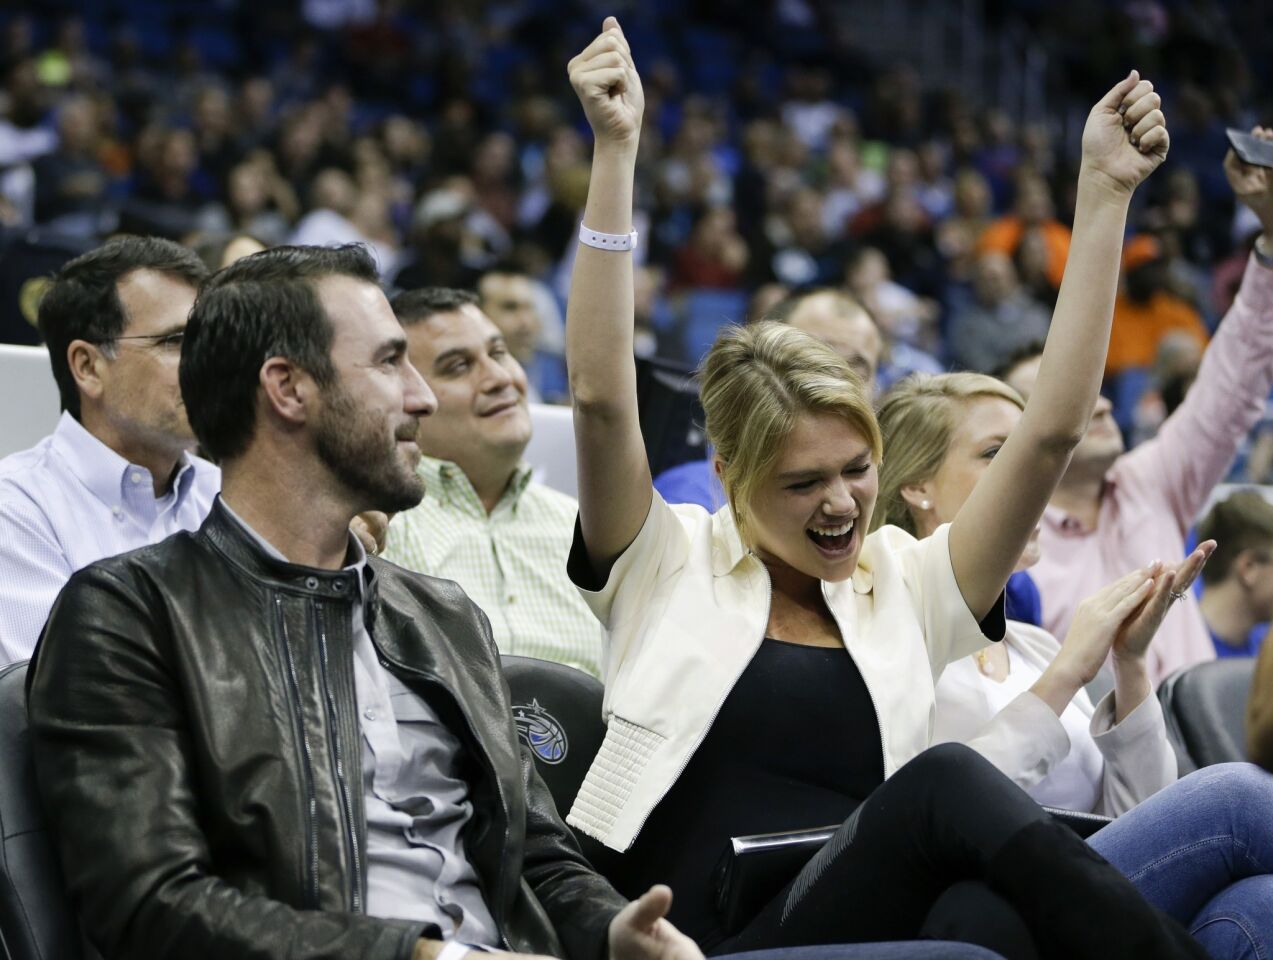 Detroit Tigers pitcher Justin Verlander and model Kate Upton cheer during the first half of an NBA game between the Orlando Magic and the Oklahoma City Thunder in Orlando, Fla.